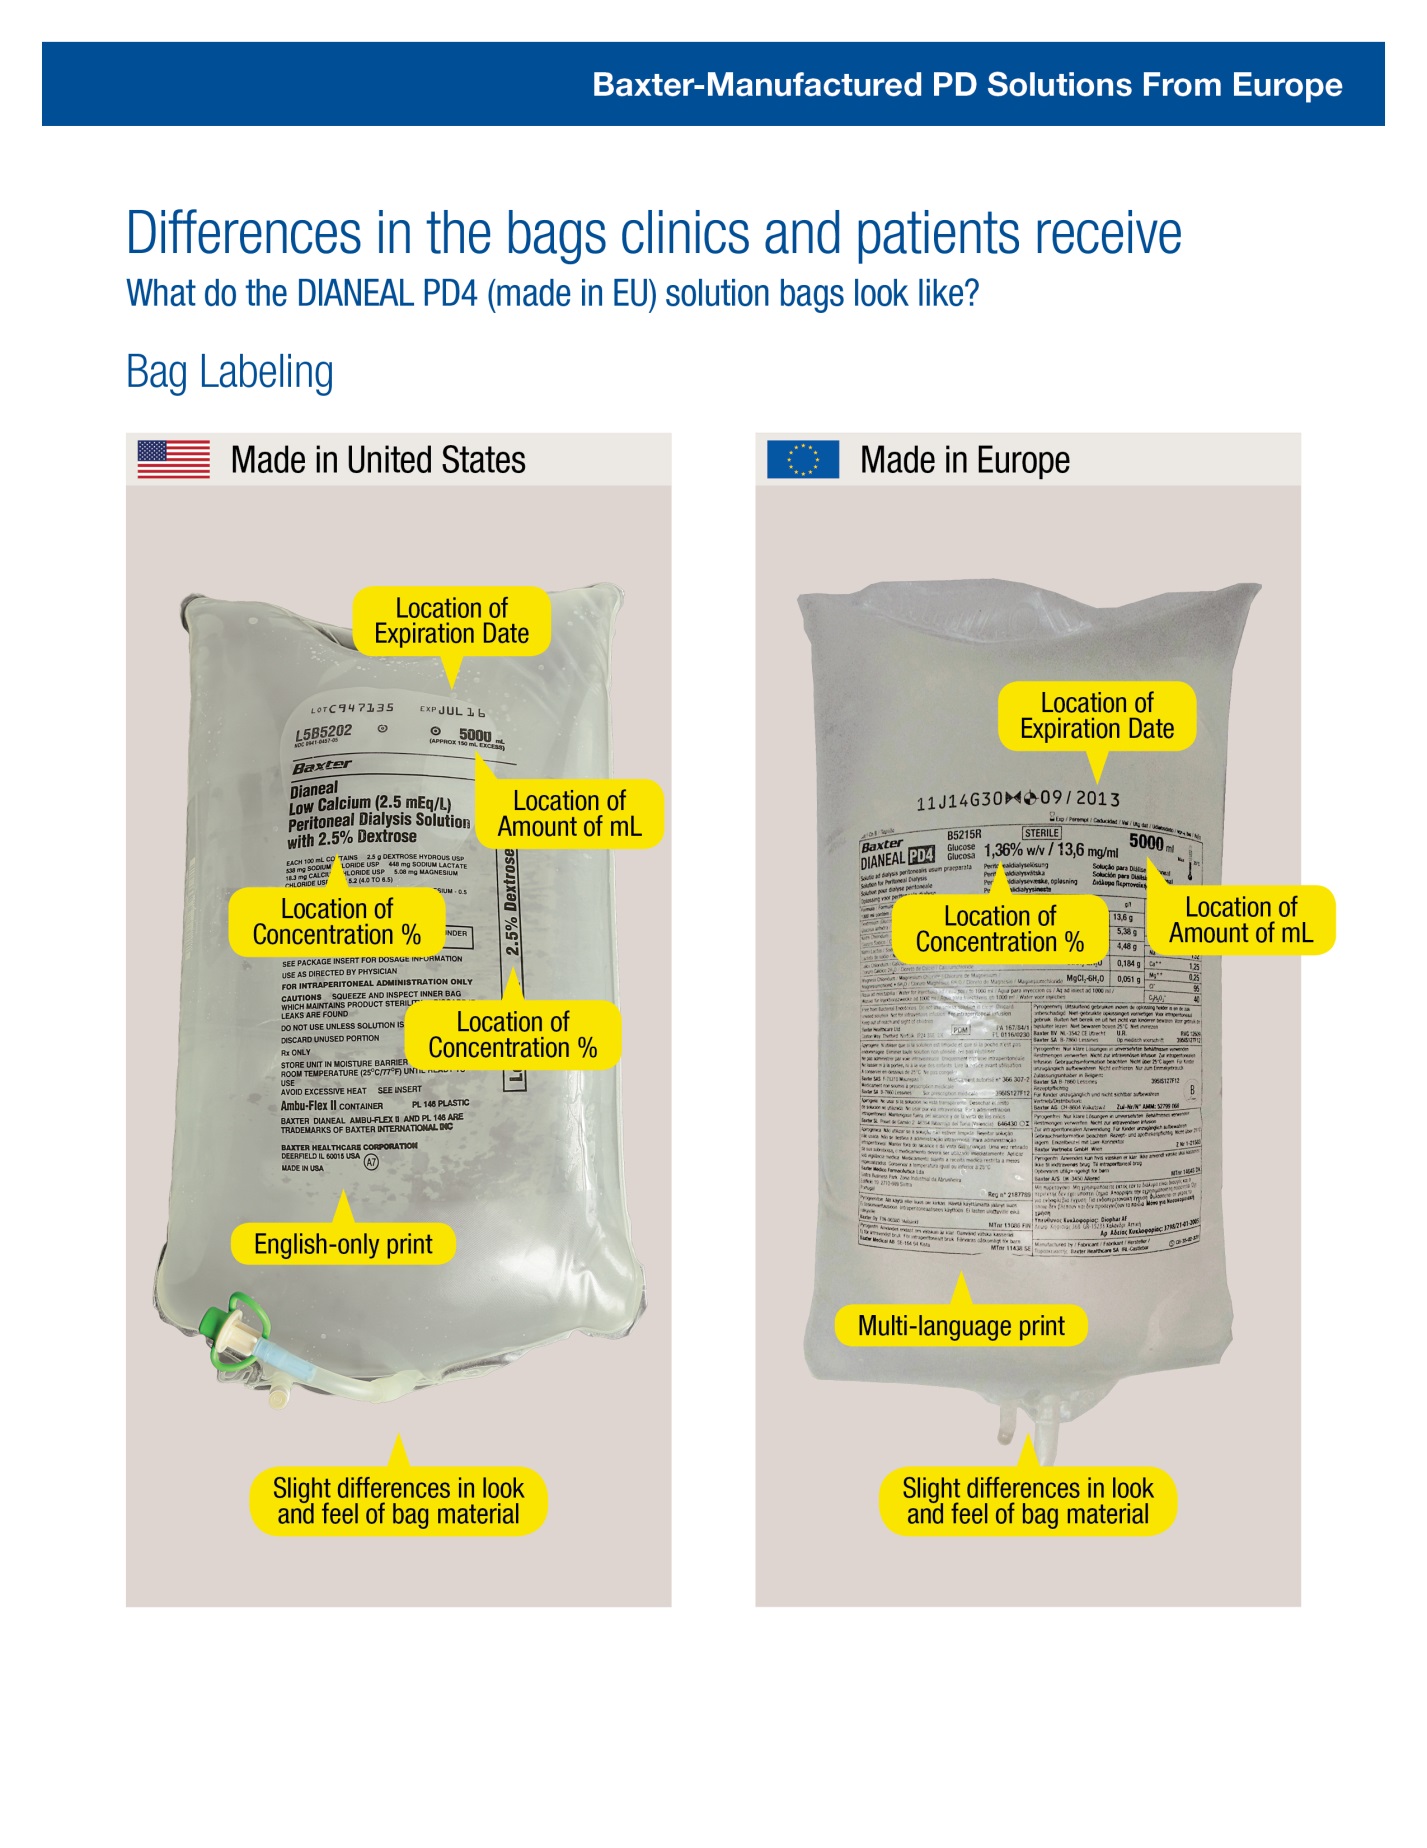 Differences in the bags clinics and patients receive